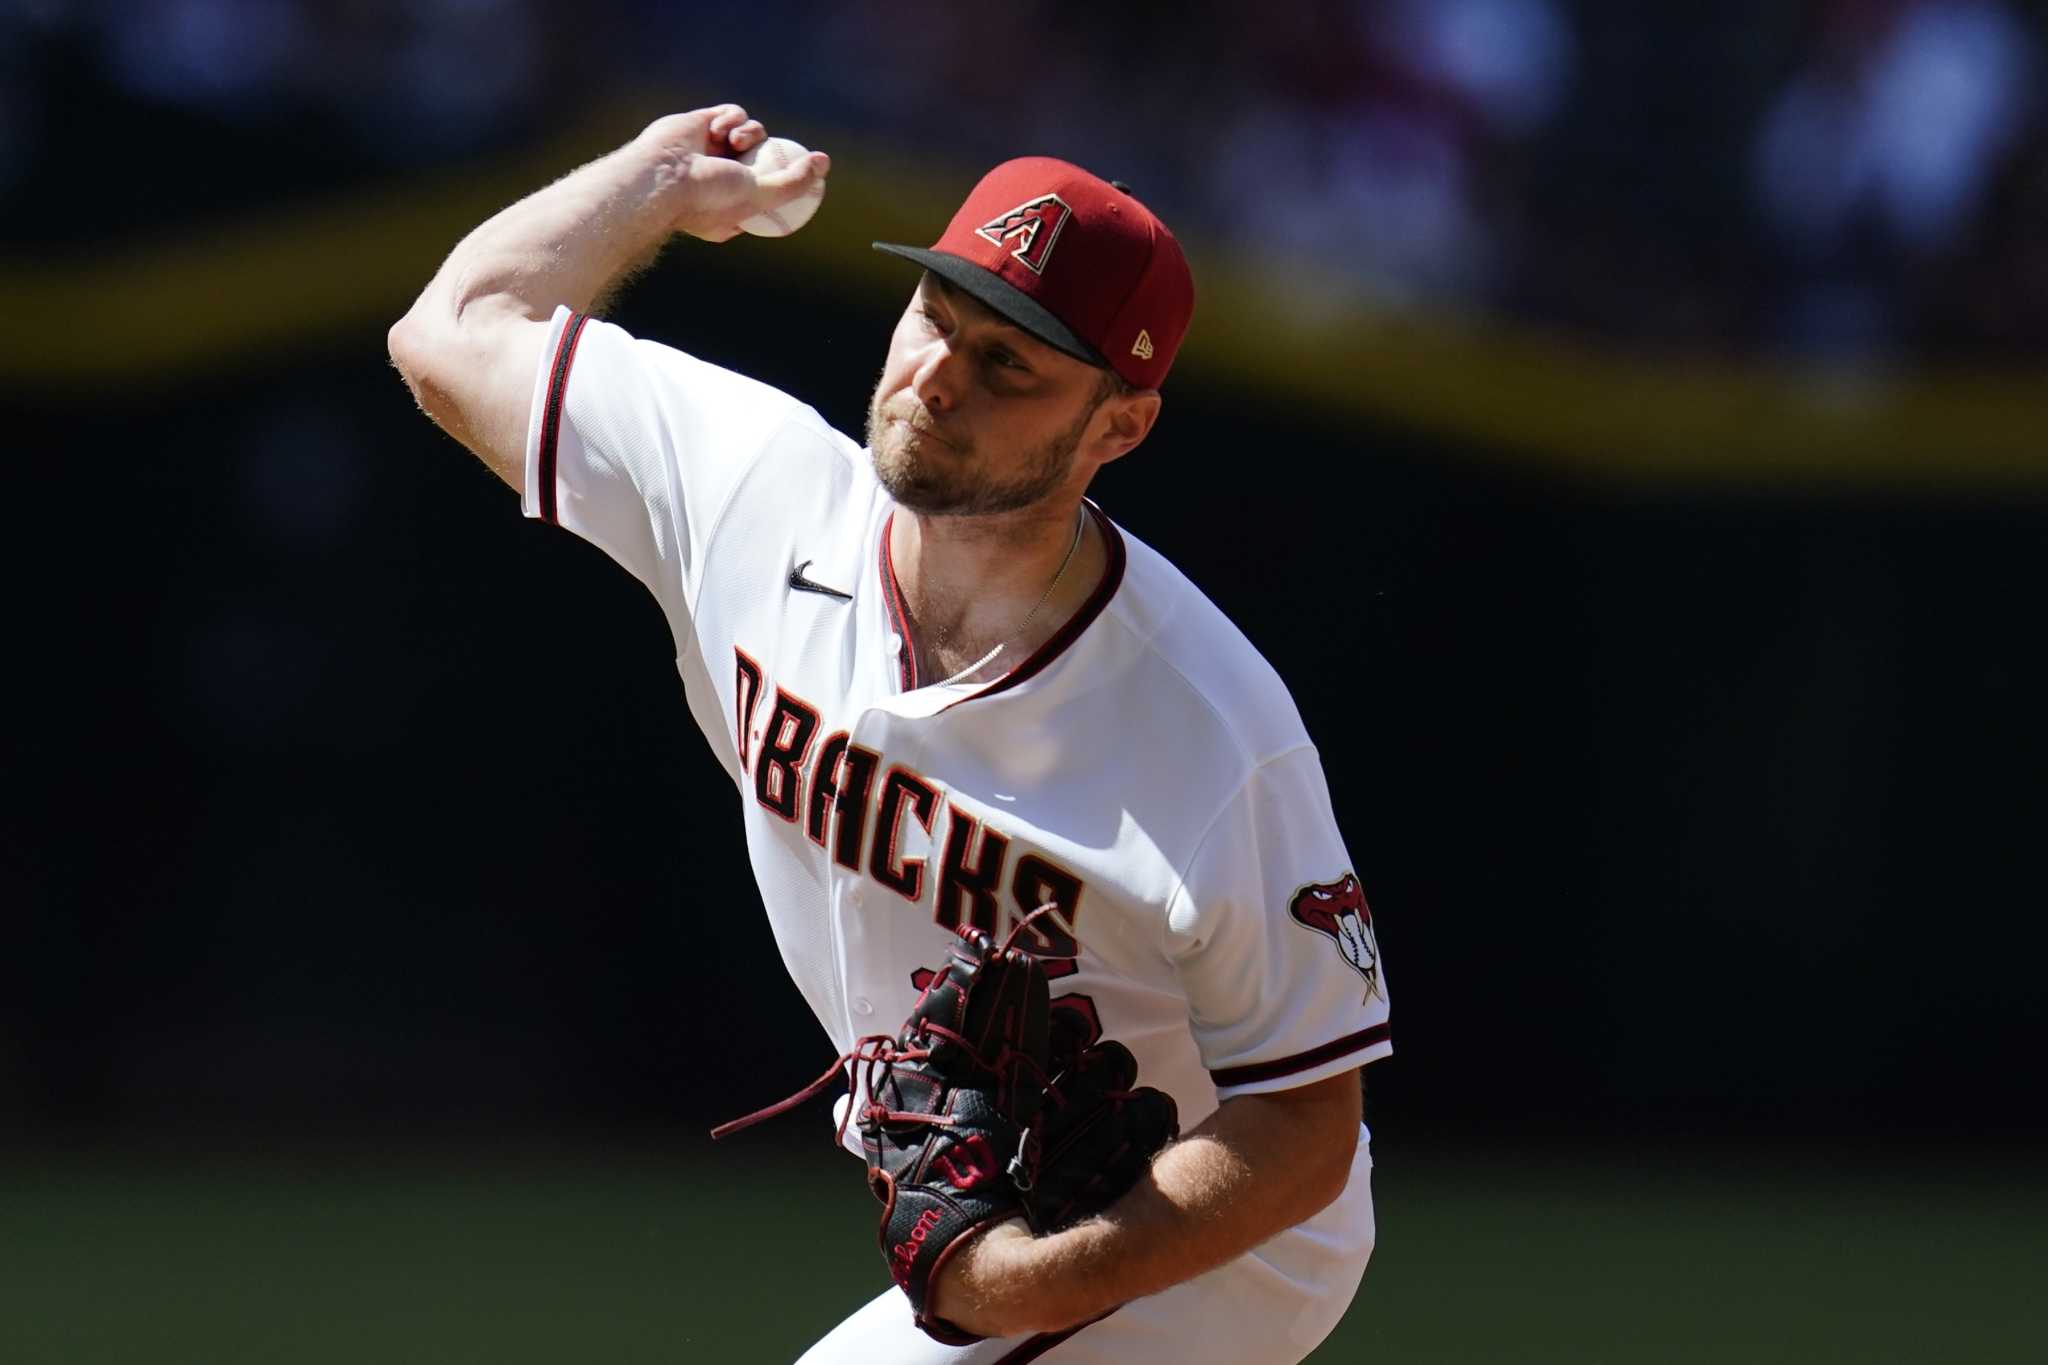 MLB trade rumors: Houston Astros acquire pitcher Zack Greinke from